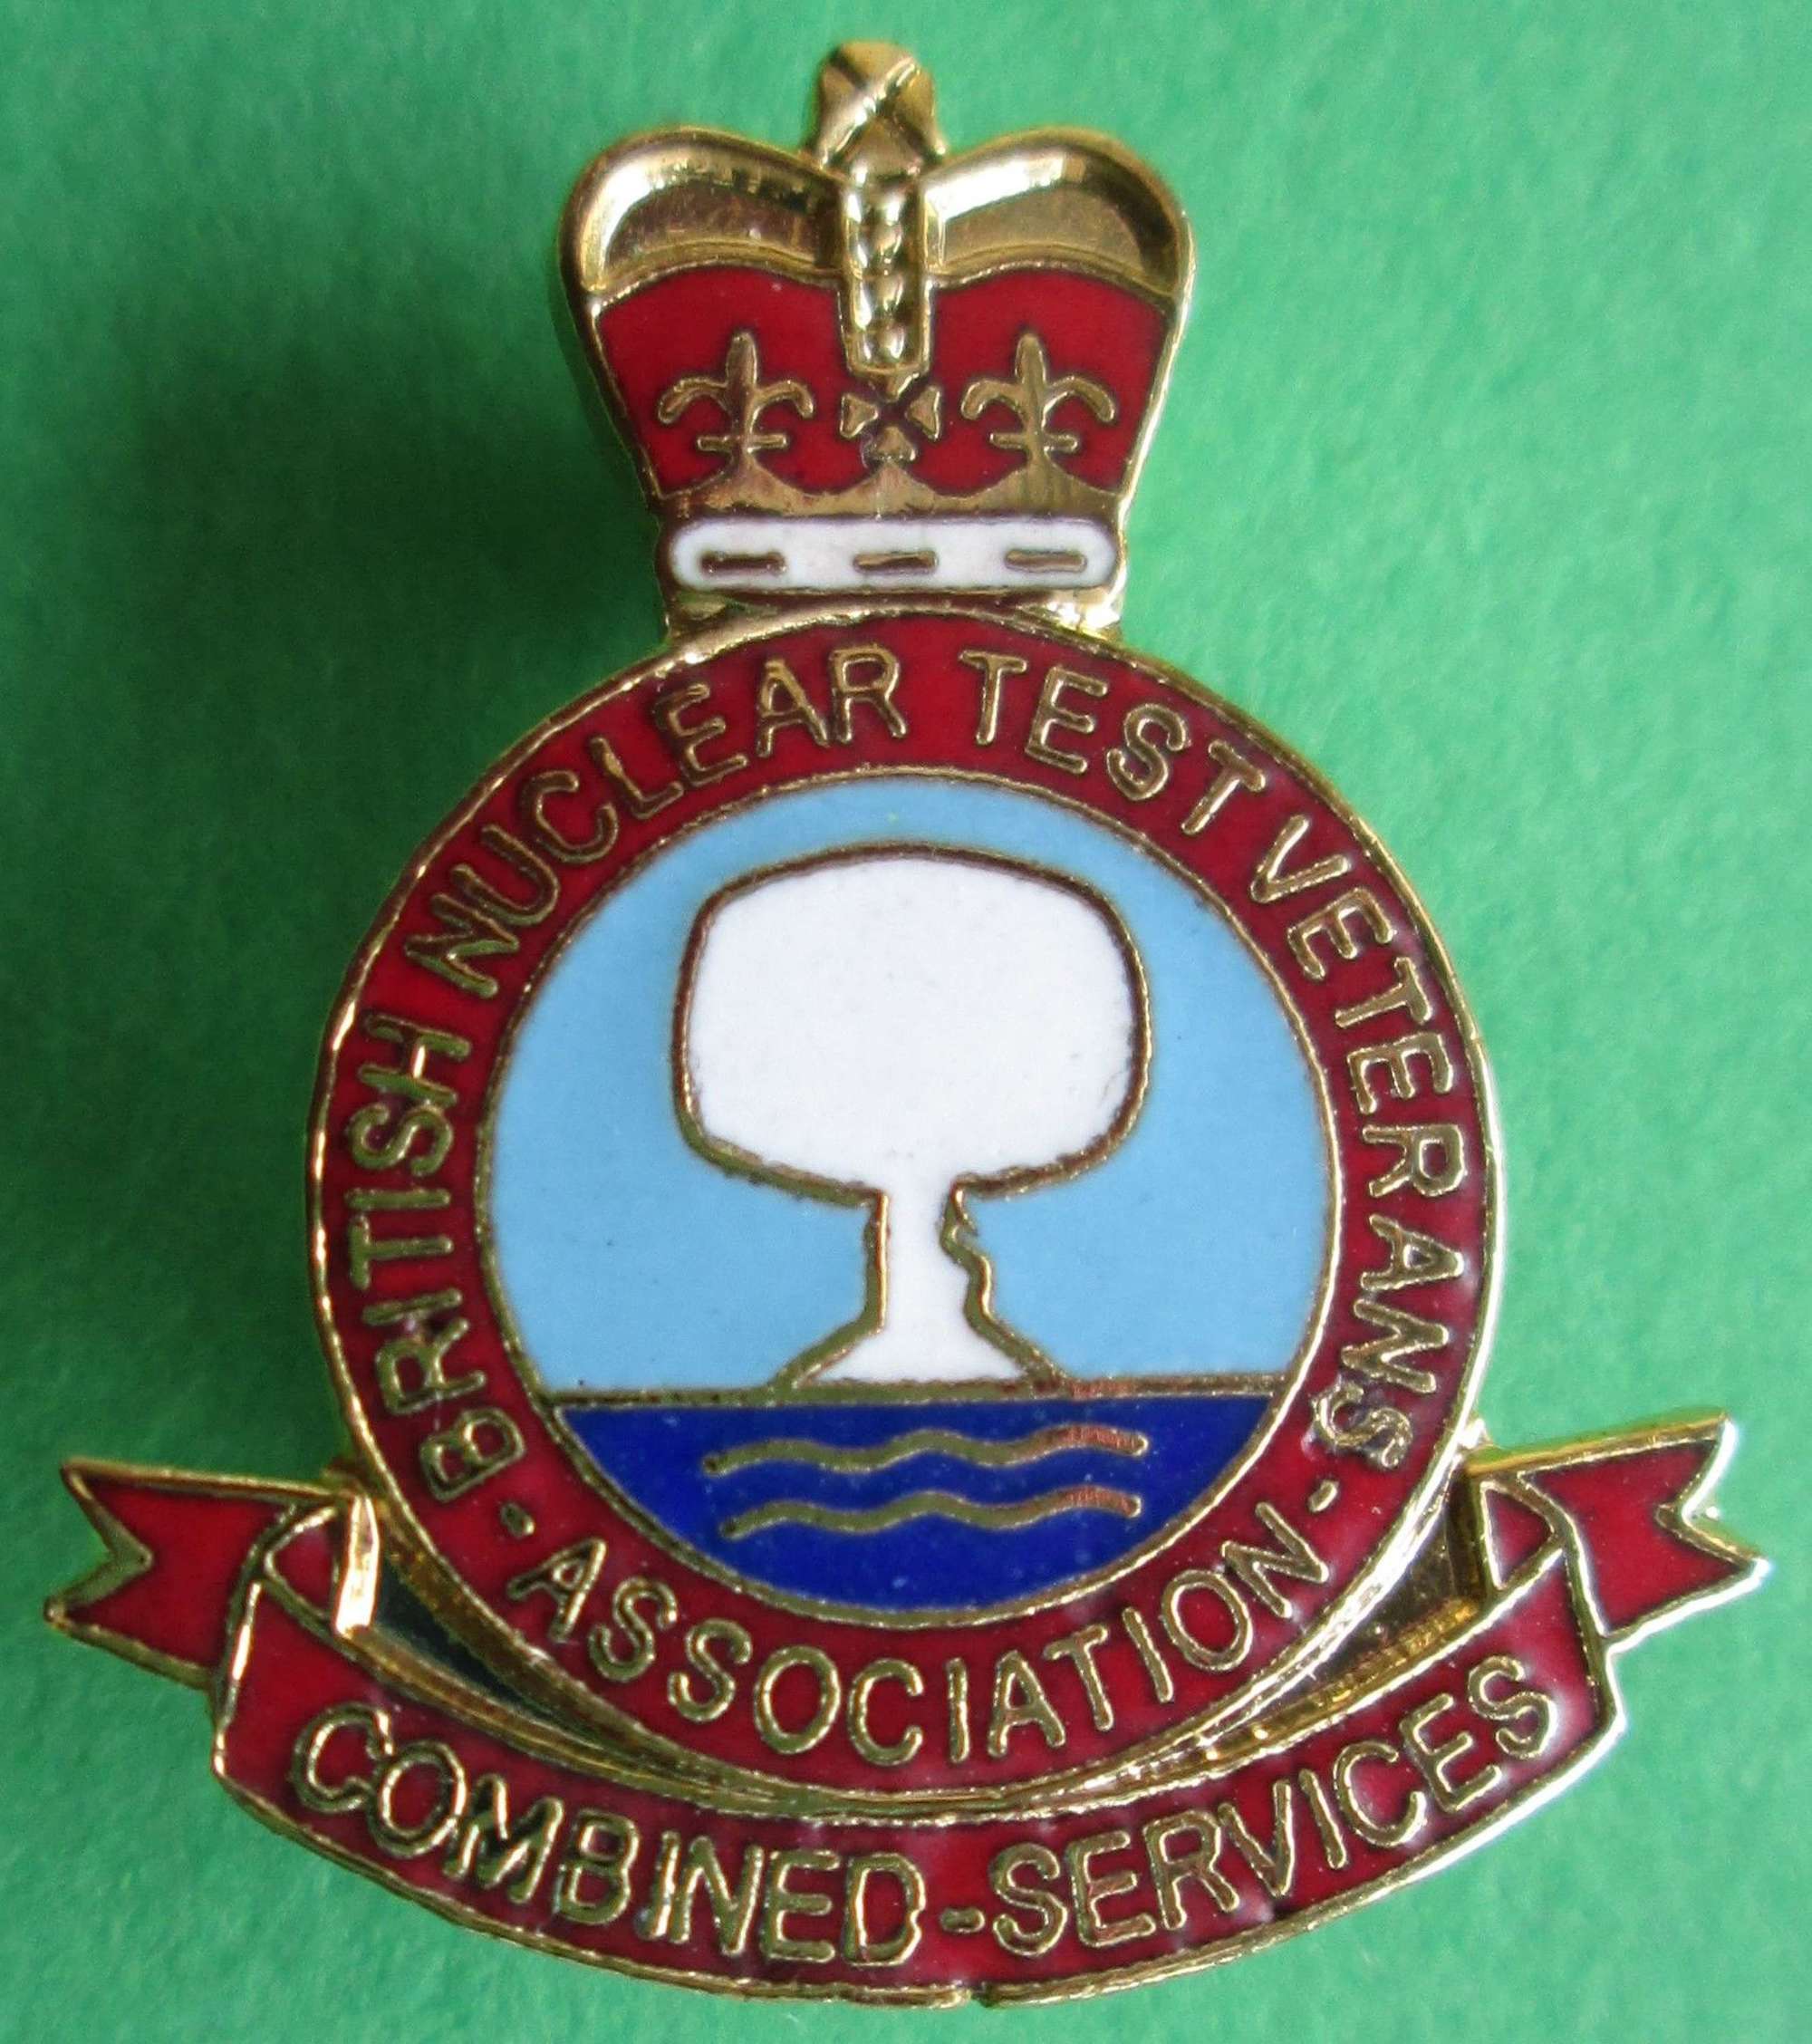 BRITISH NUCLEAR TEST VETERANS ASSOCIATION COMBINED SERVICES BADGE